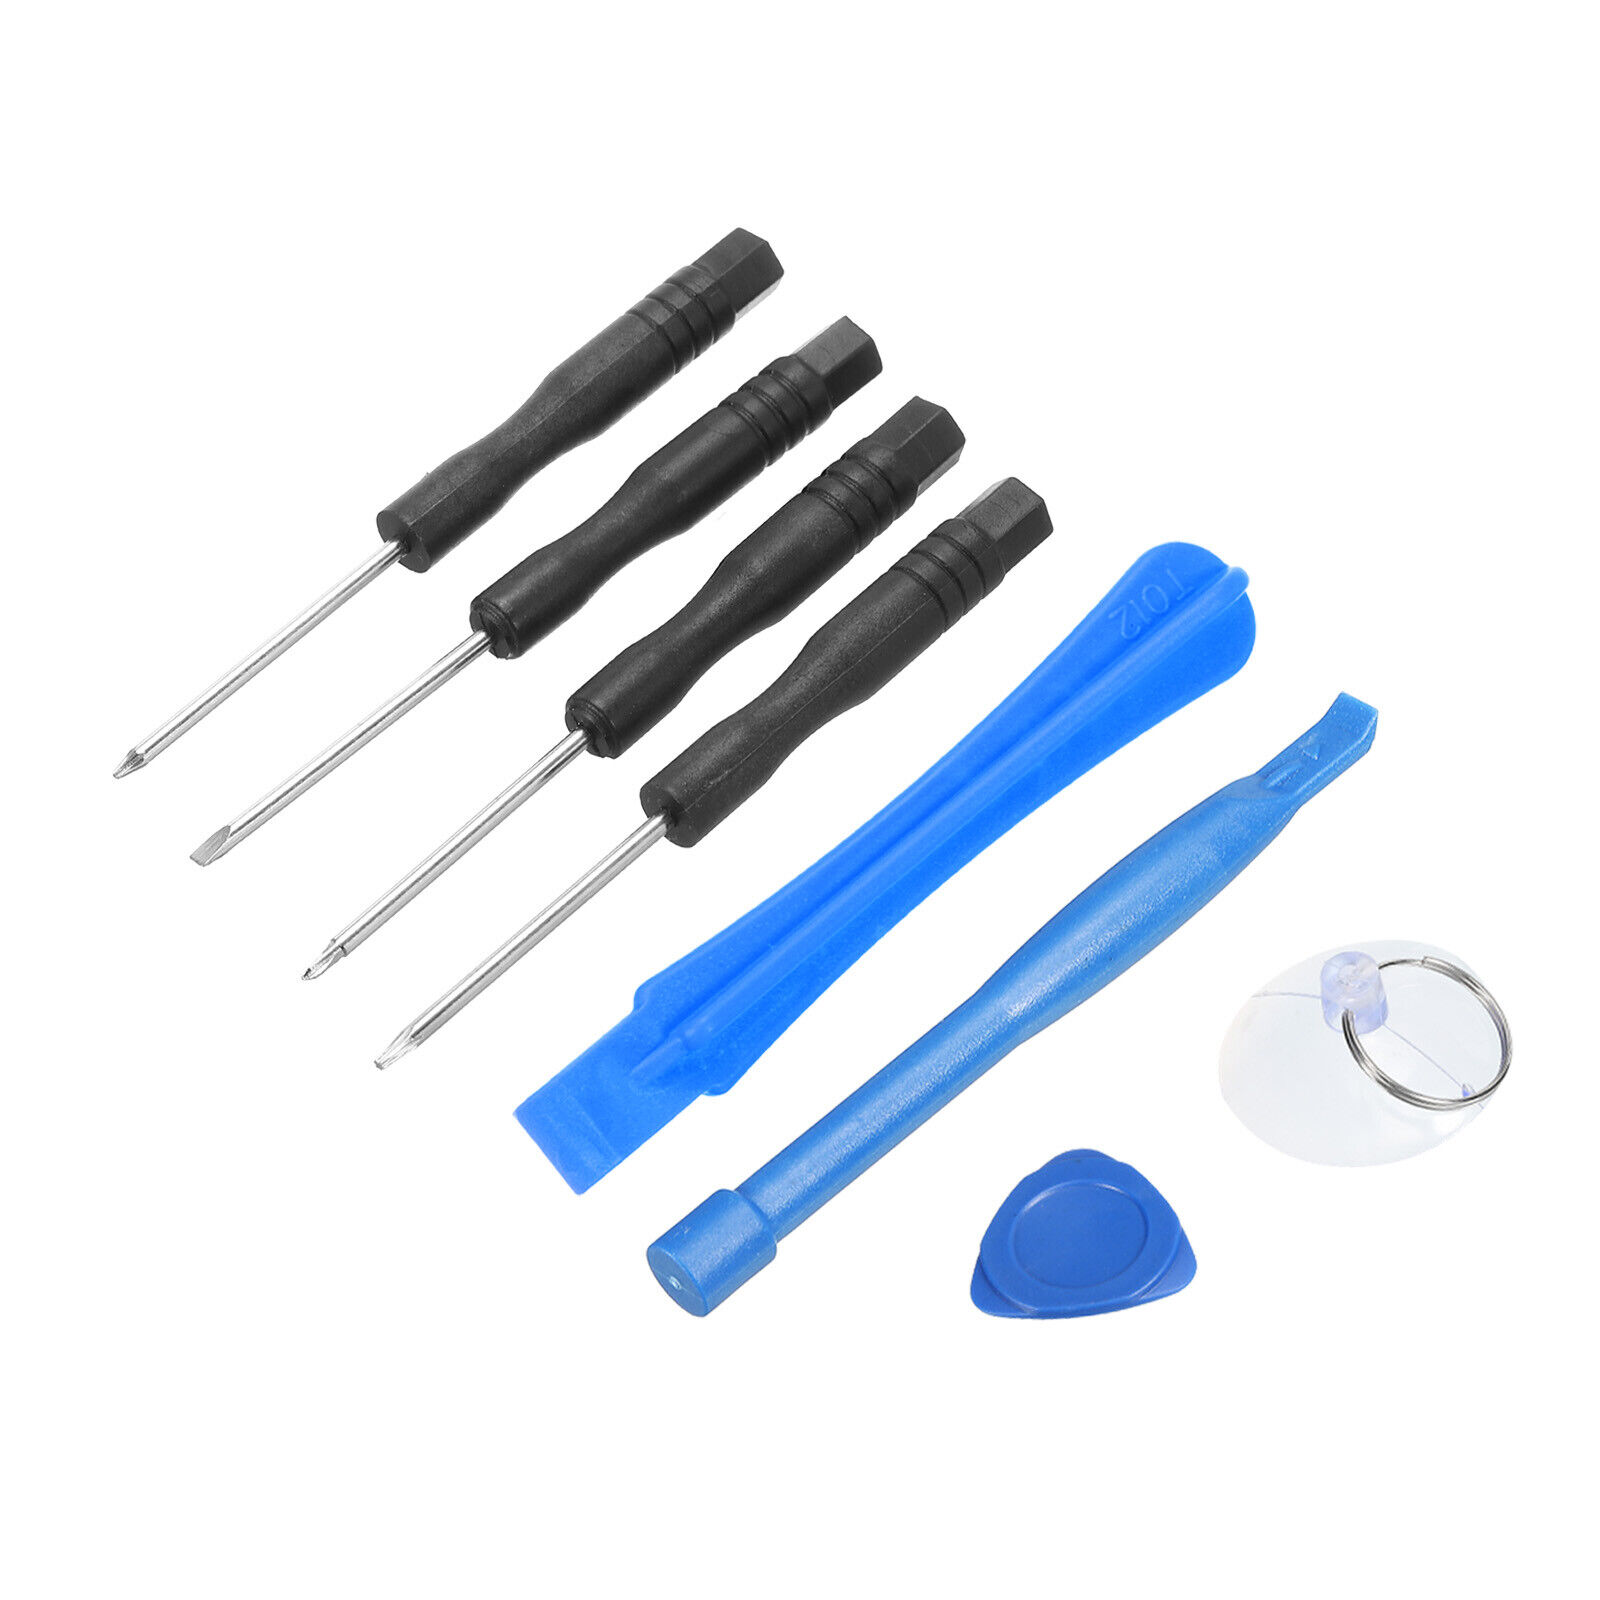 Phone Pry Opening Tools Screwdriver Spudger Kit Set 9 in 1 for Cellphone